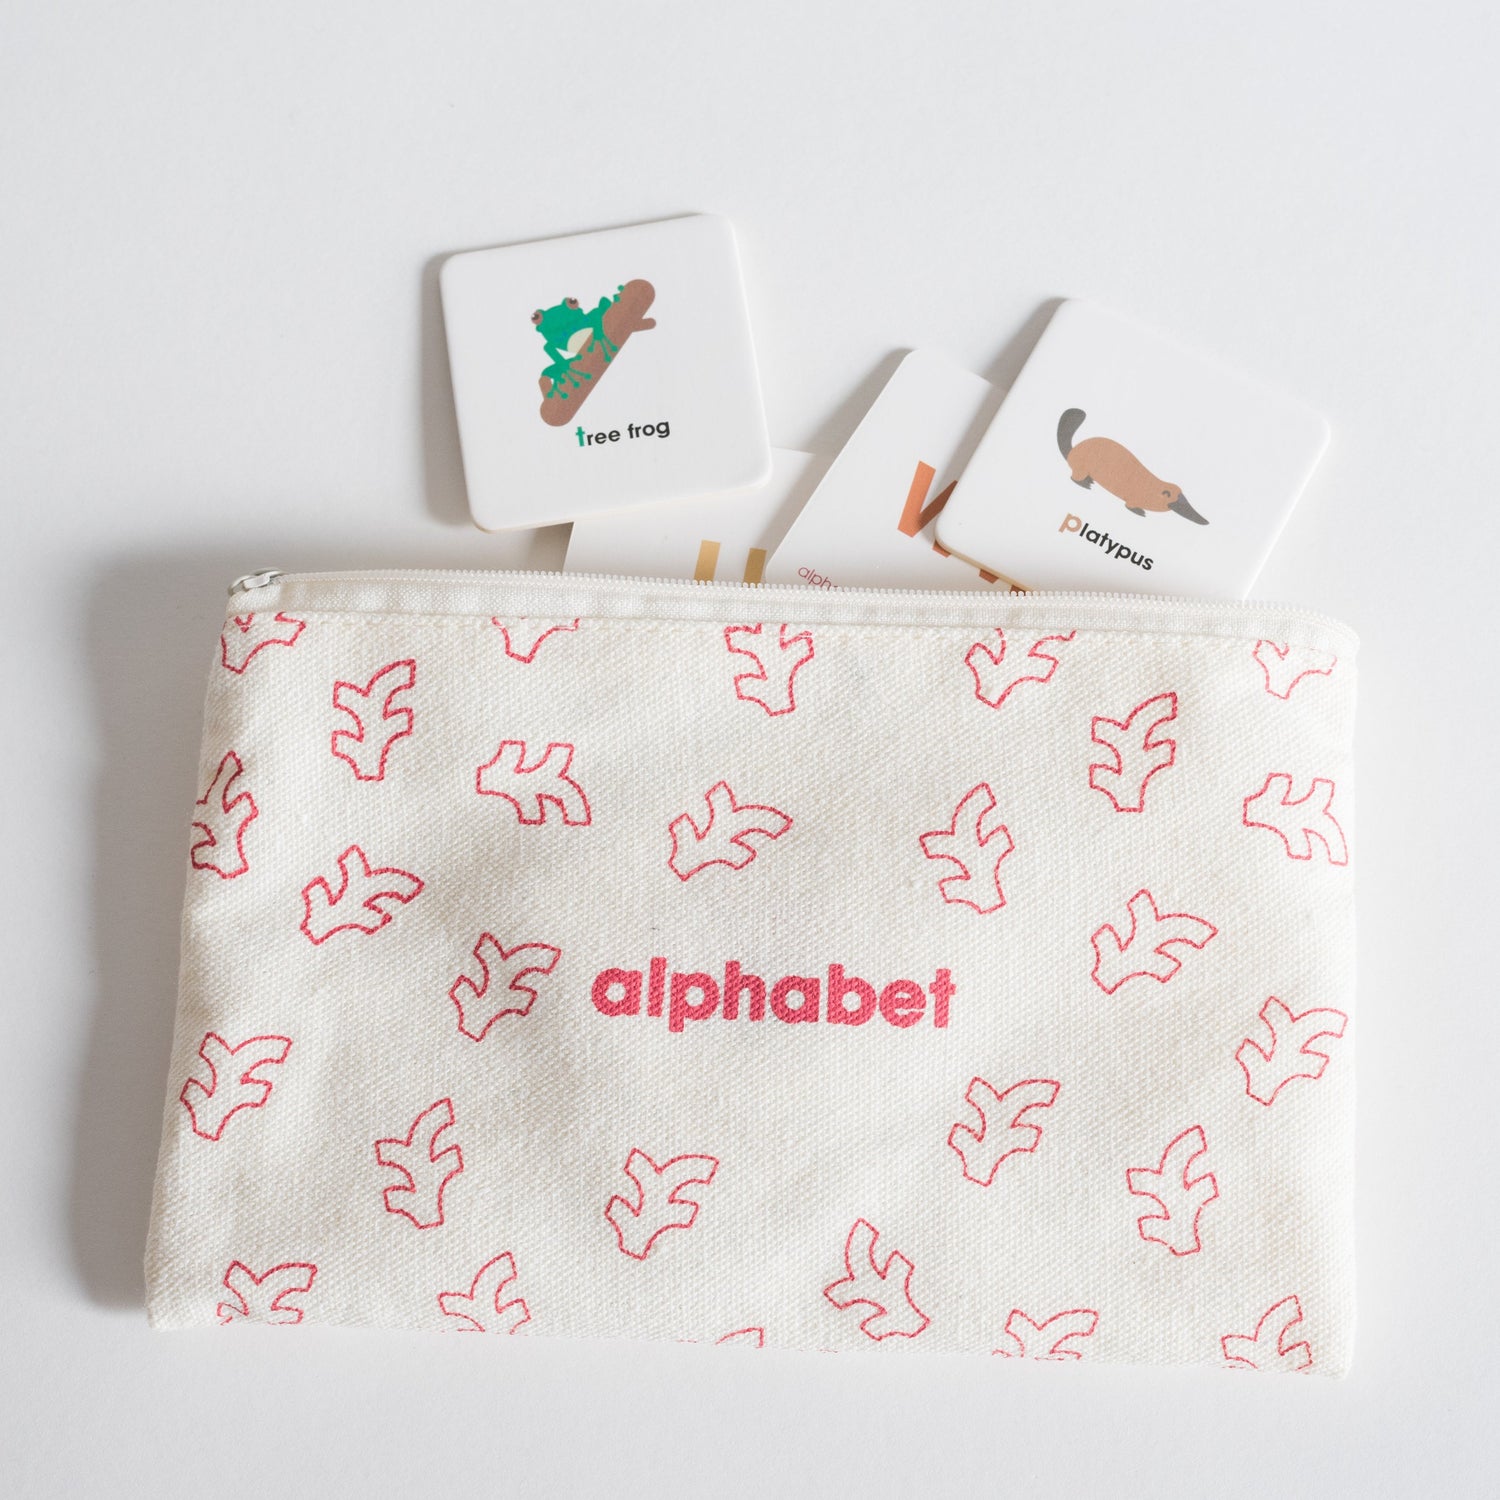 Cloth zippered Alphabet Tile Pack pouch on white background with four tiles spilling out